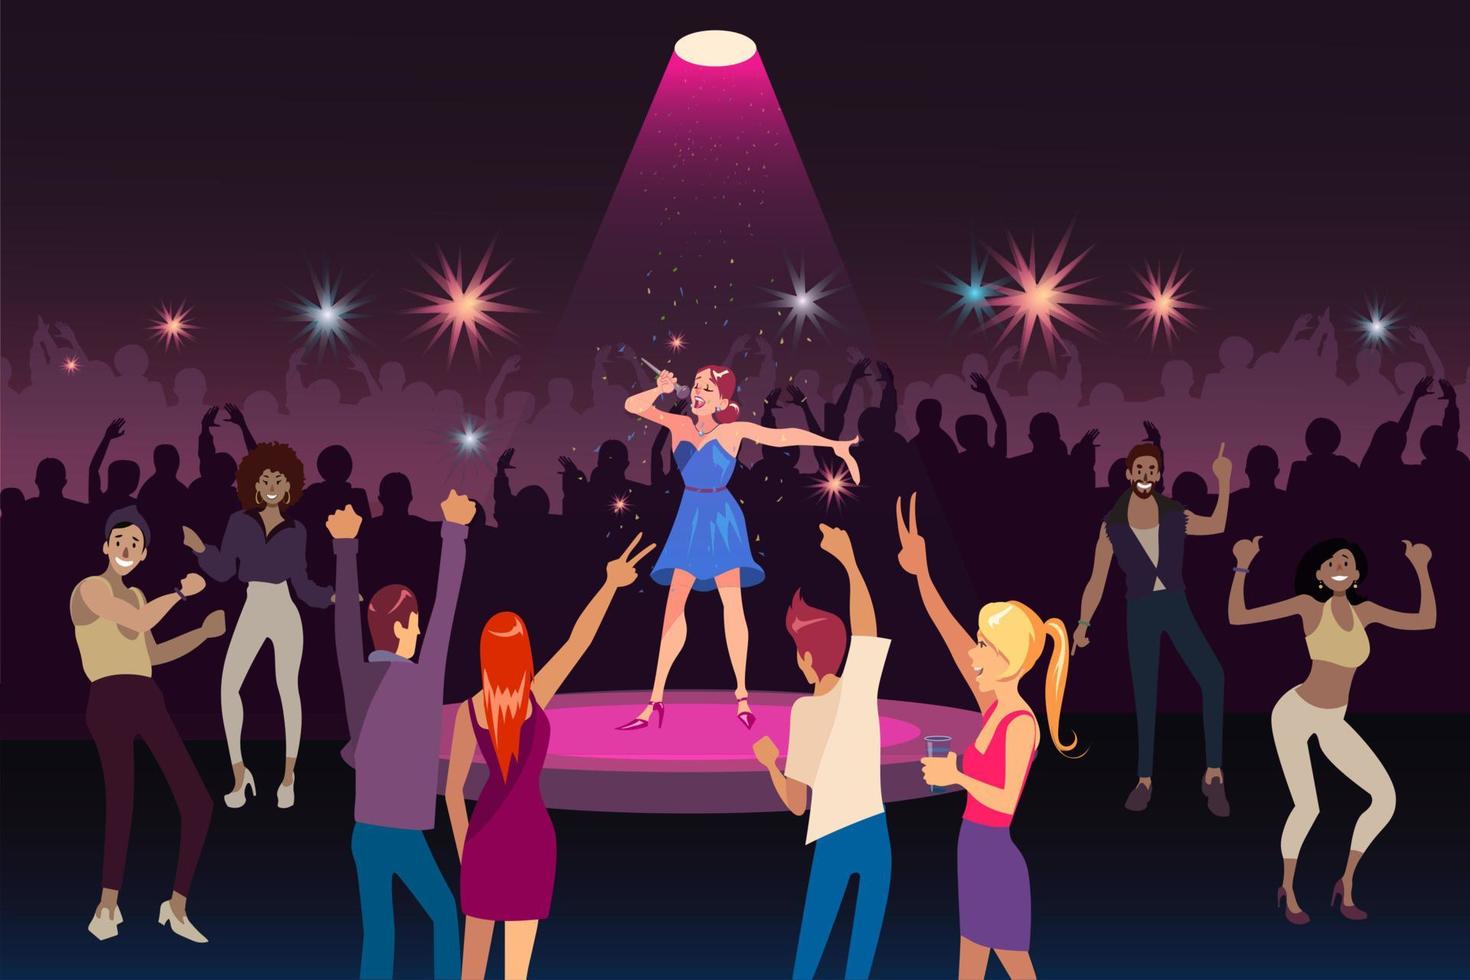 Concert performance, disco party with modern music, nightlife youth event concept vector